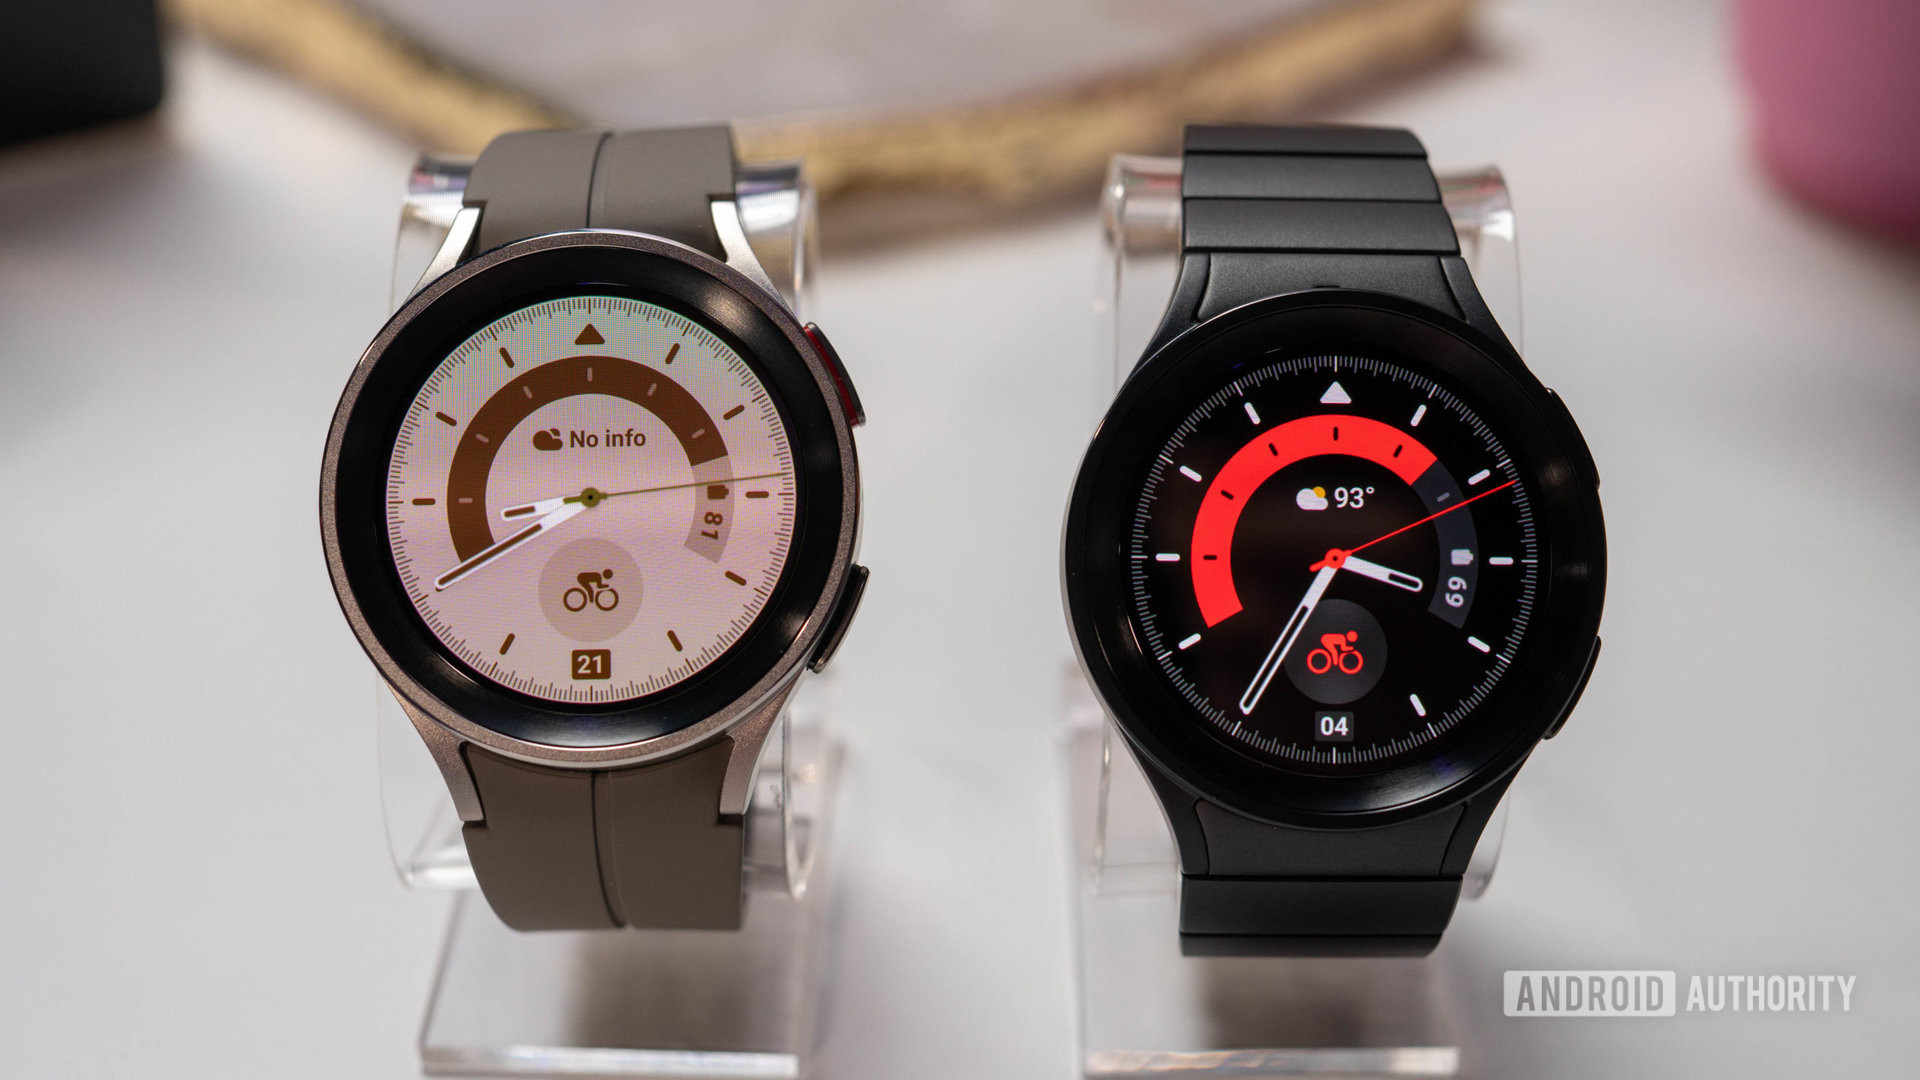 Samsung Galaxy Watch 5 Pro front view in titanium gray and titanium black colors with fluoroelastomer and metal straps